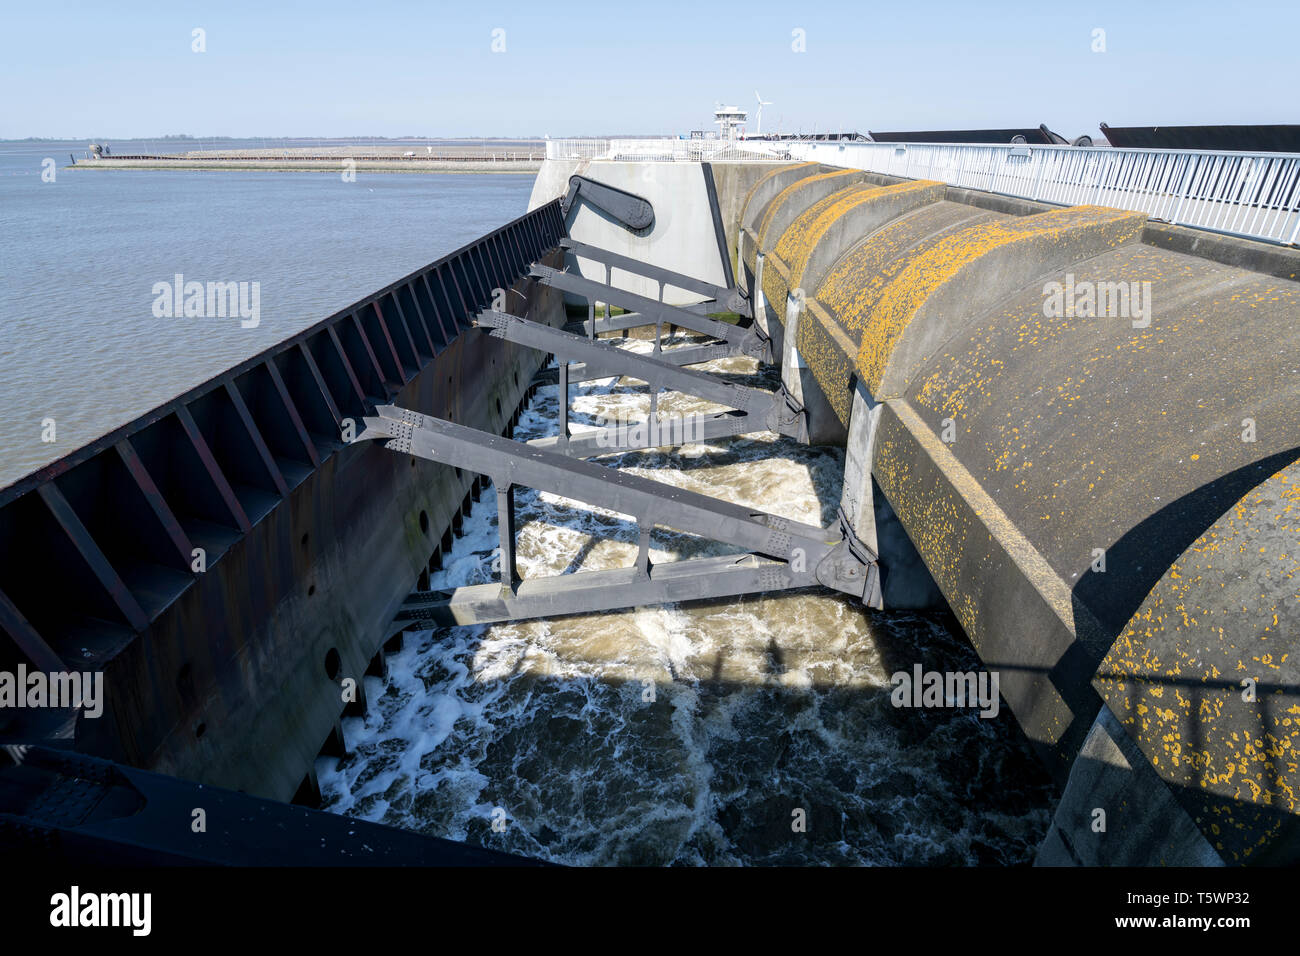 Eidersperrwerk (Eider Barrage) at the mouth of the river Eider on Germany’s North Sea coast. It is Germany’s largest coastal protection structure. Stock Photo